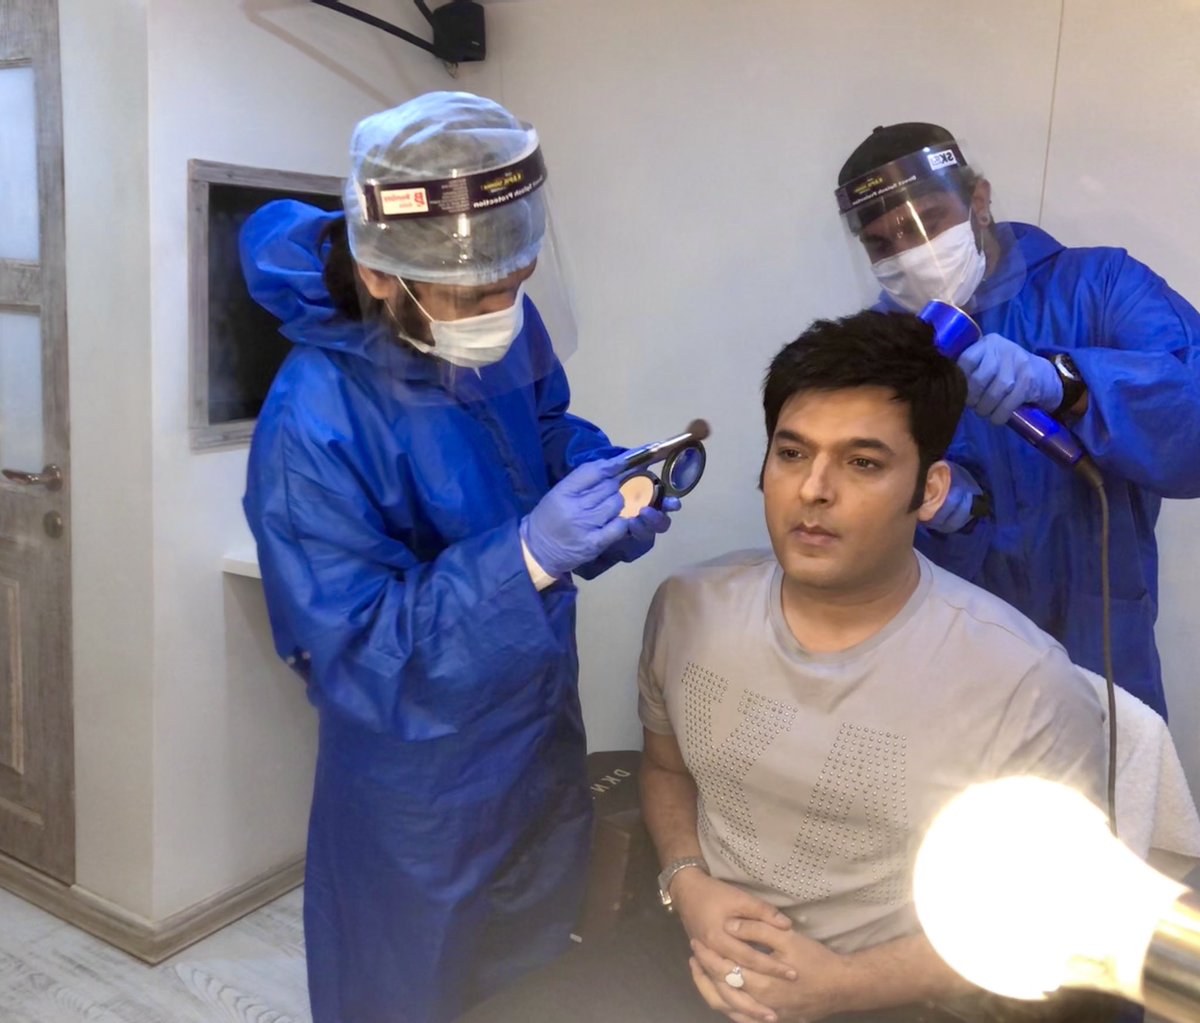 Thanks to these two gentlemen who took care of me in my struggling  journey from beard to clean shave 🪒 पर बताया इन्होंने अभी भी नहीं कि यह दोनो कौन हैं 🤔 #newnormal #2020 #shooting #thekapilsharmashow #tkss #comedy #fun #laughter #staysafe 🤗❤️🙏